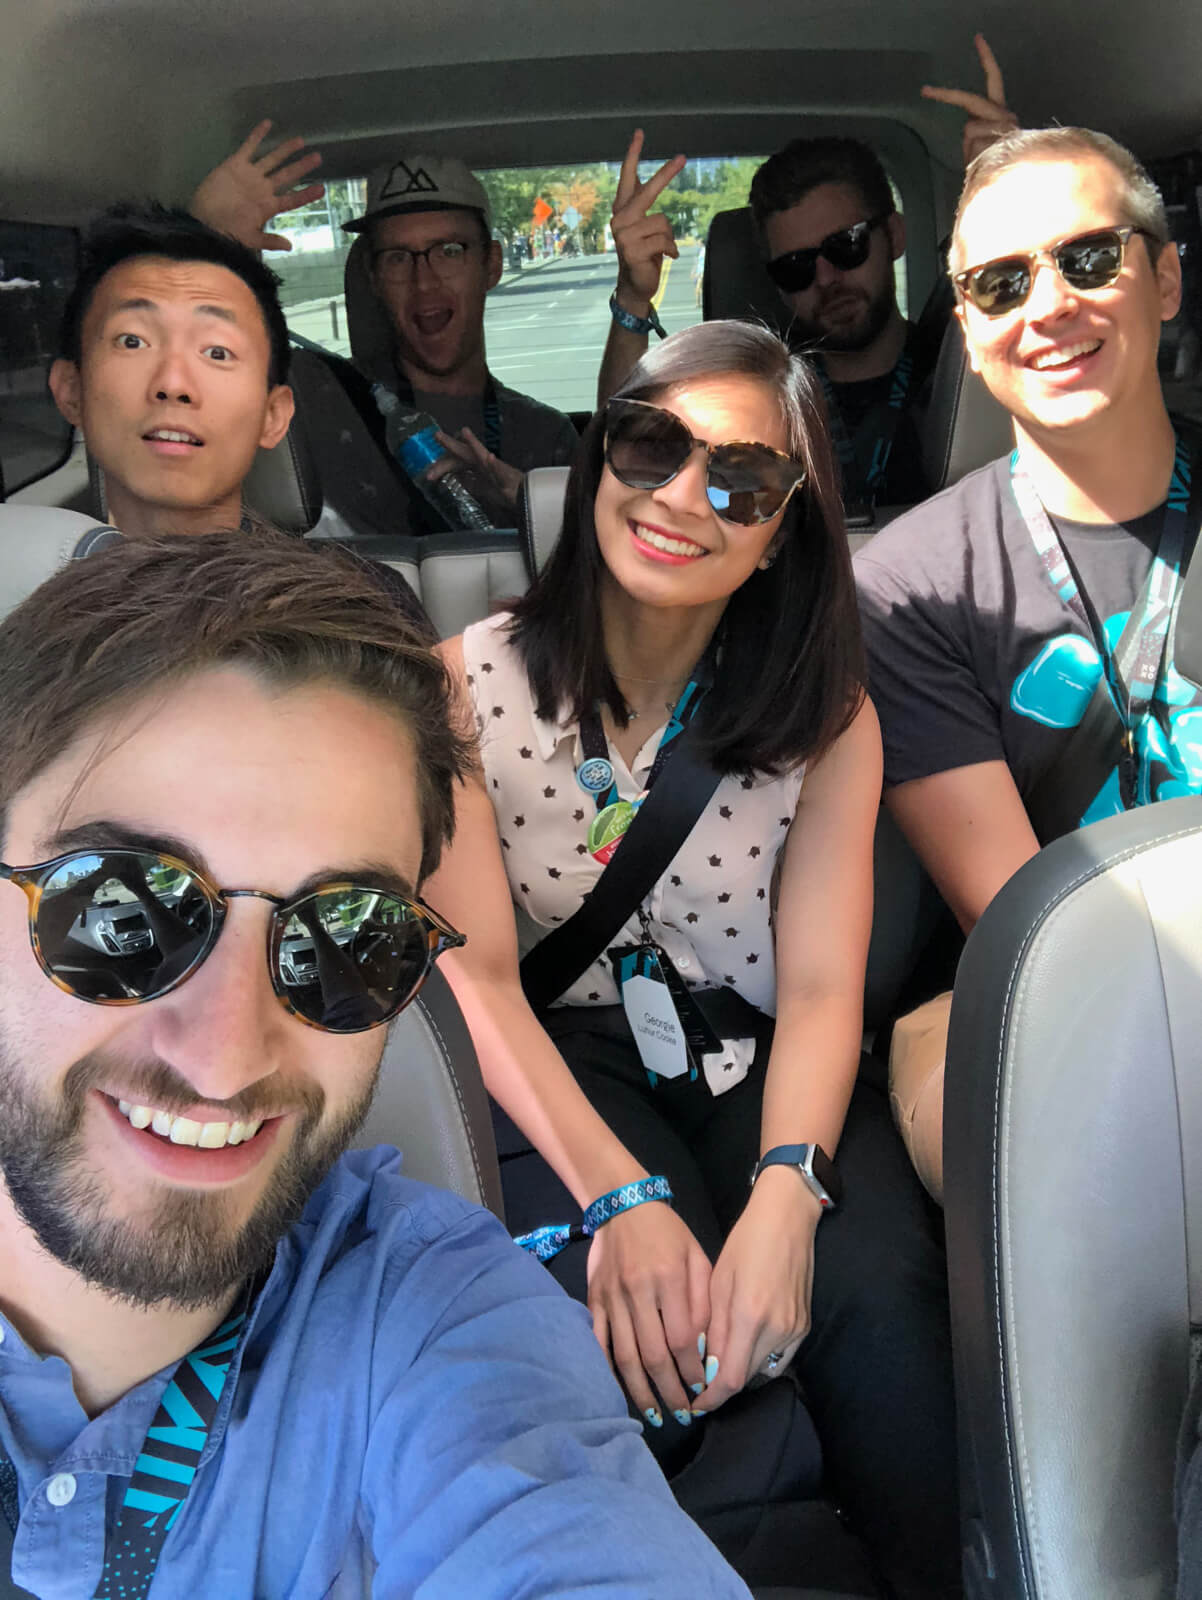 A selfie taken in a car, taken by the man in the passenger seat. There are three people in the second row and two people in the back of the car